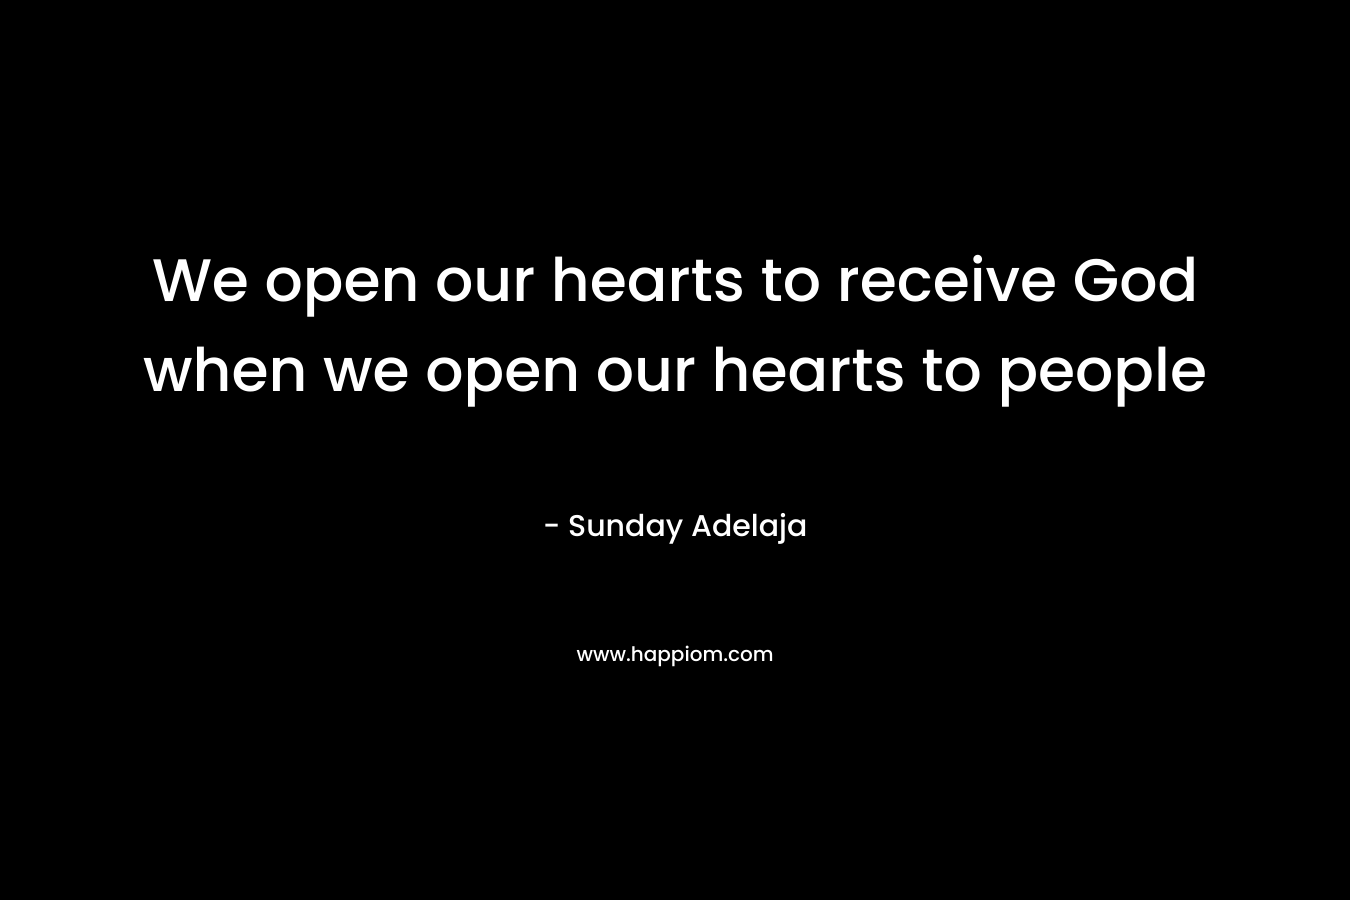 We open our hearts to receive God when we open our hearts to people